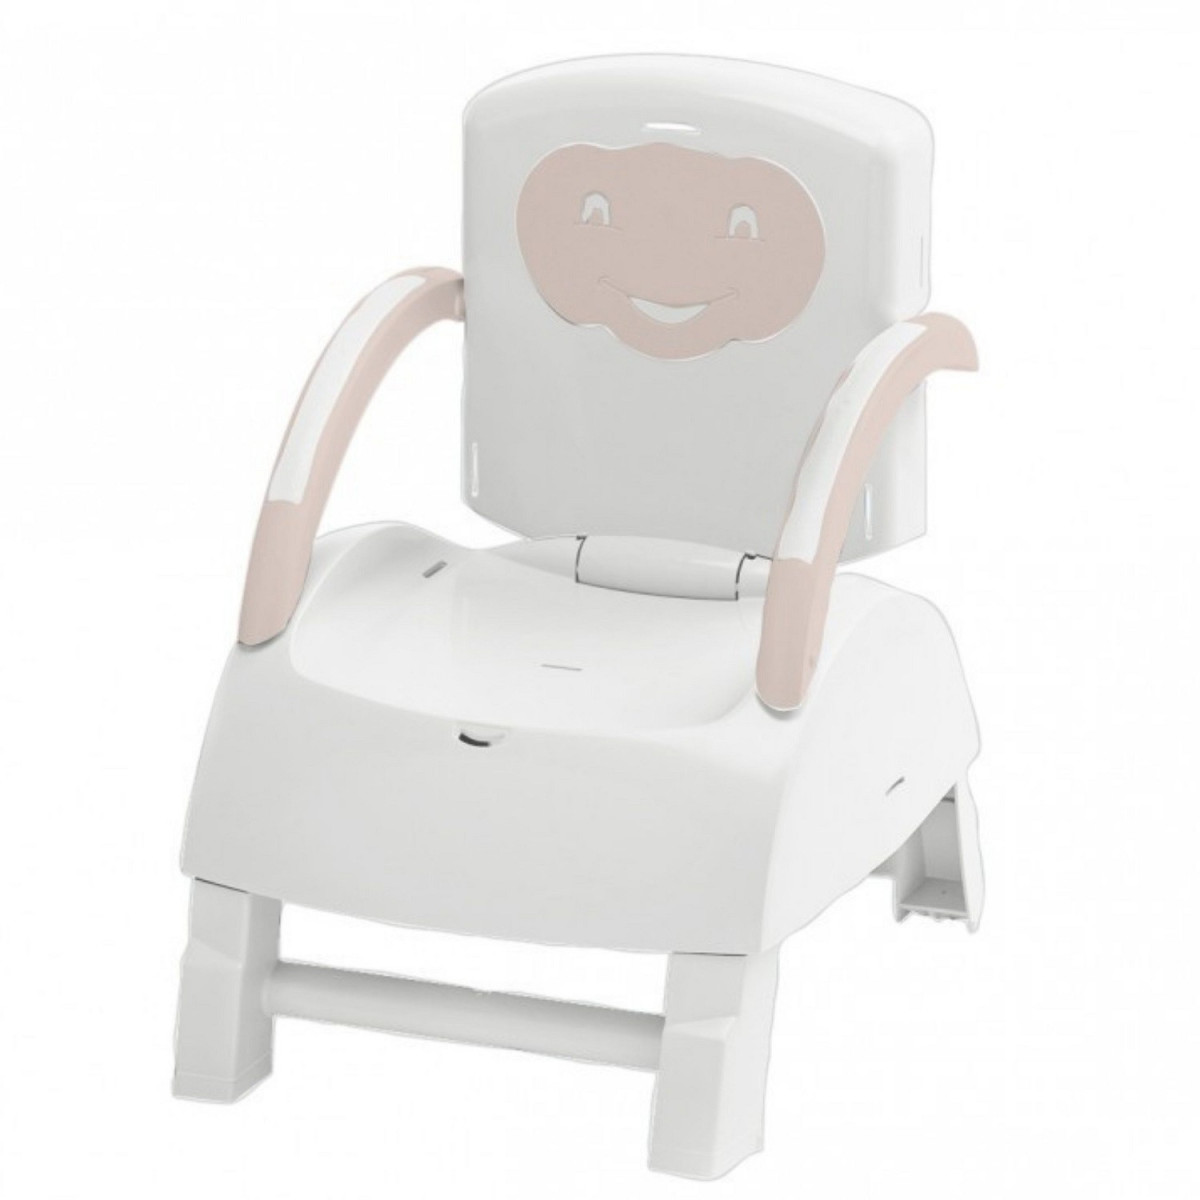 60 Coussinets d'allaitement jetables, Thermobaby de Thermobaby